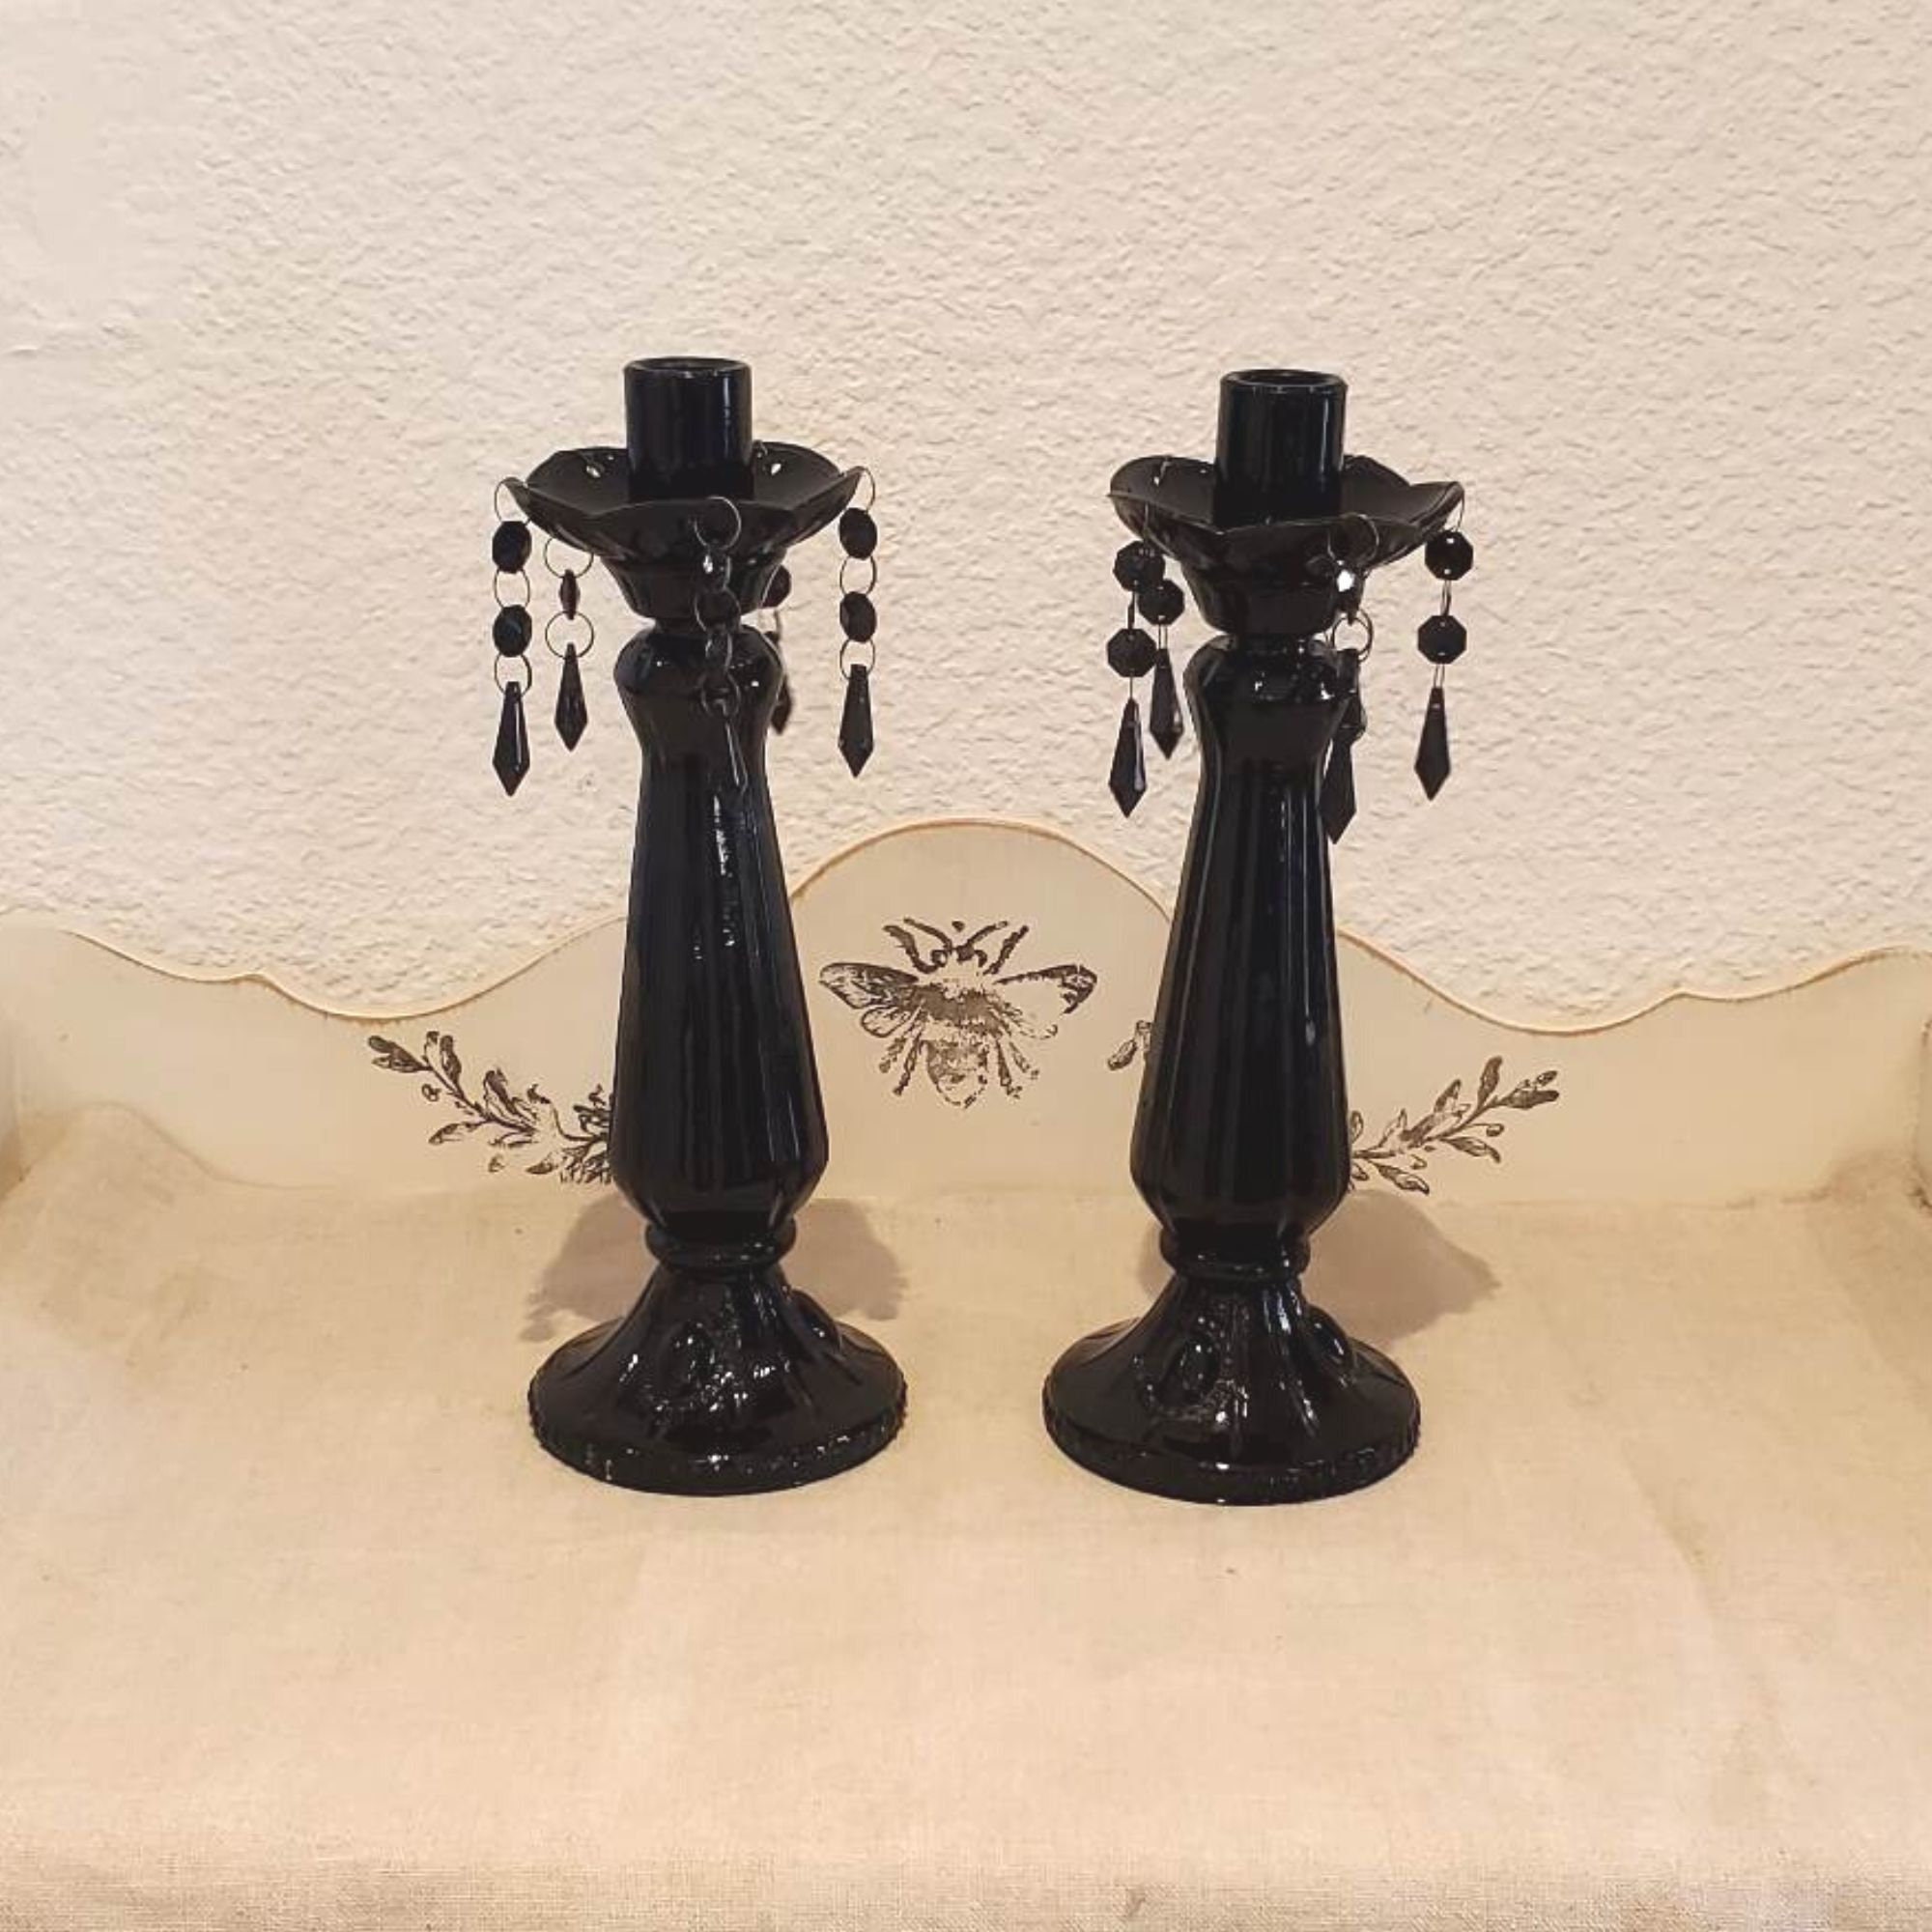 Pair of Glass Candlesticks. Black Gothic Candelabra With Pendants